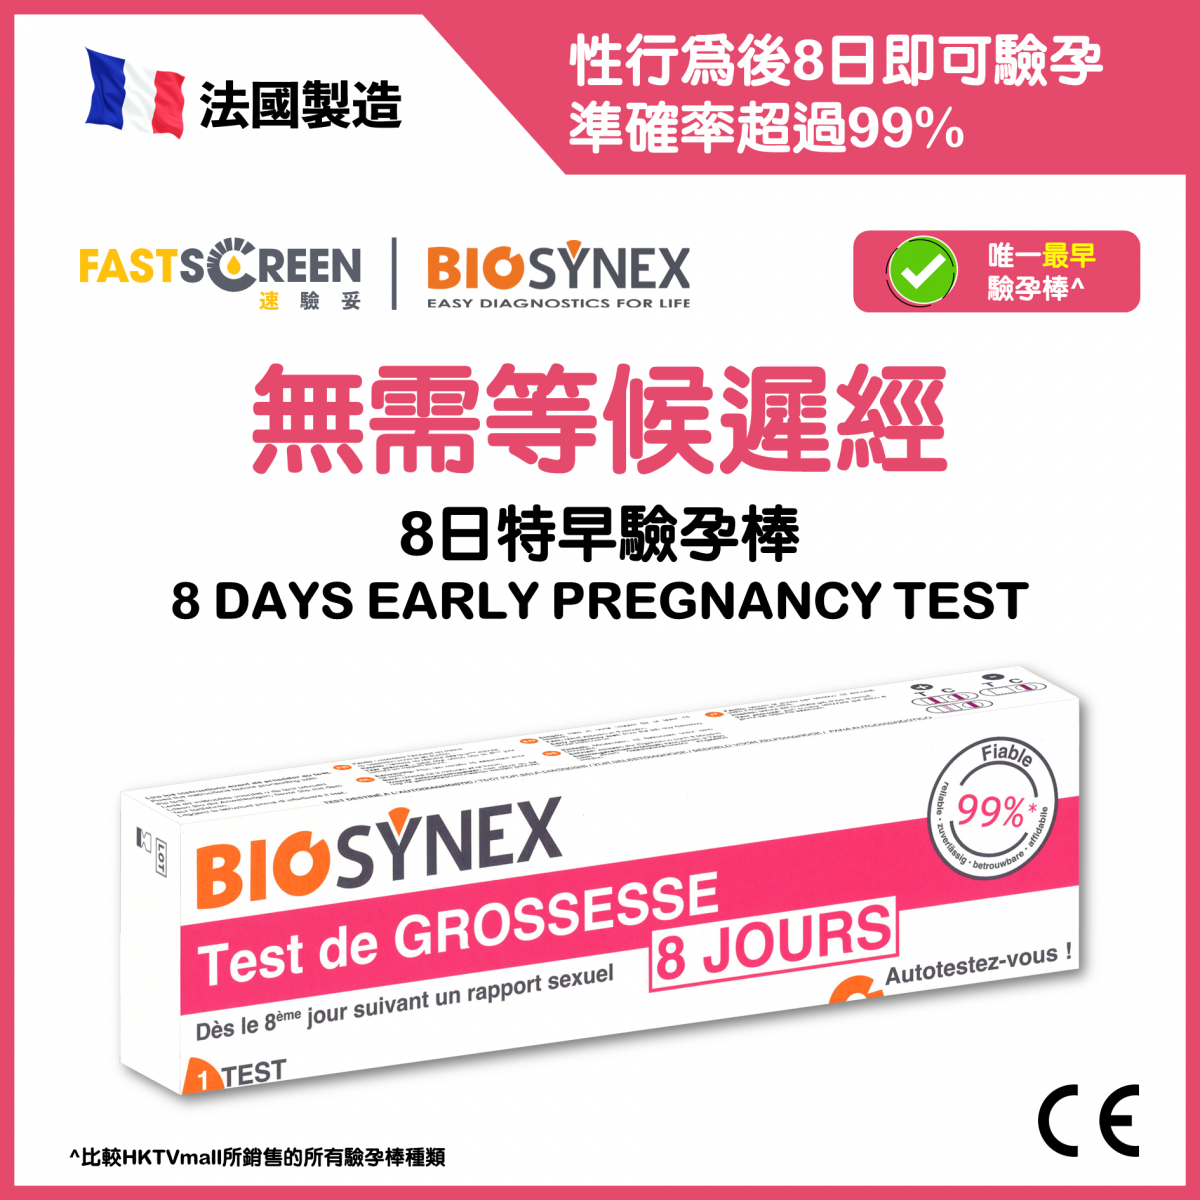 8 days early pregnancy test | Pregnancy test on 8th day after intercourse